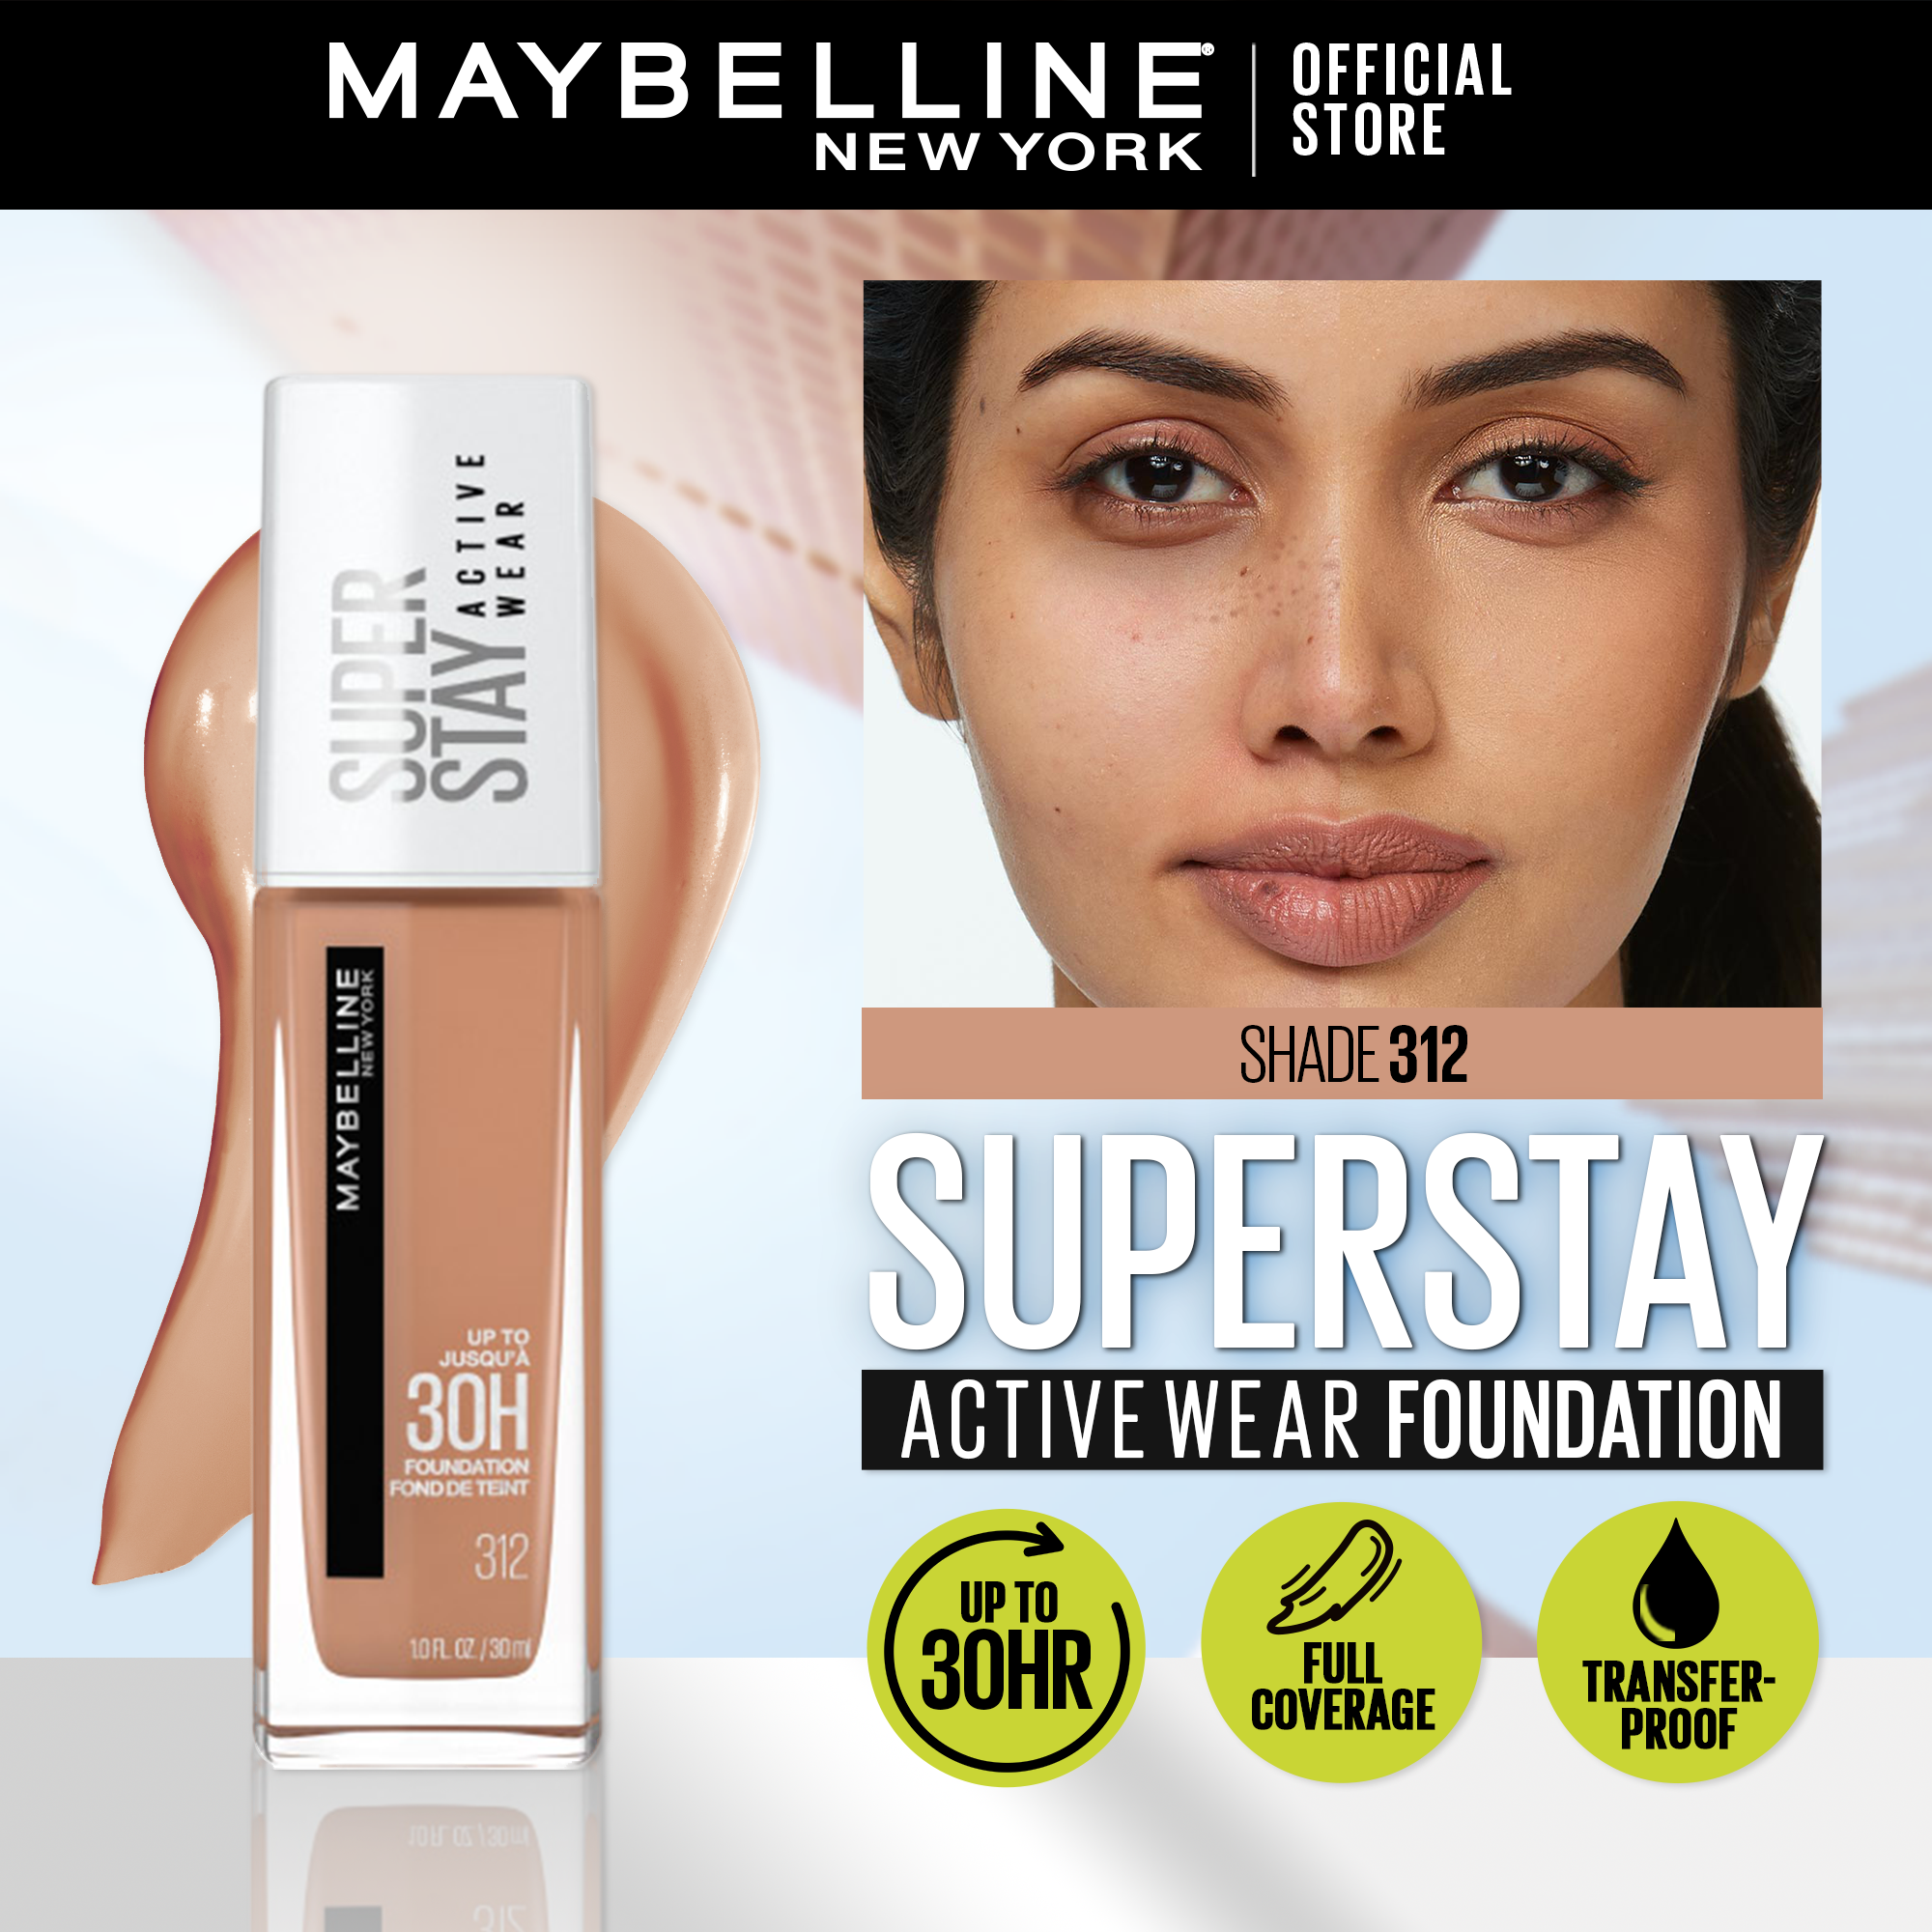 Superstay Wear | Coverage, Lazada PH (30mL) Maybelline Foundation lasting, Waterproof 30HR Liquid - Active Long